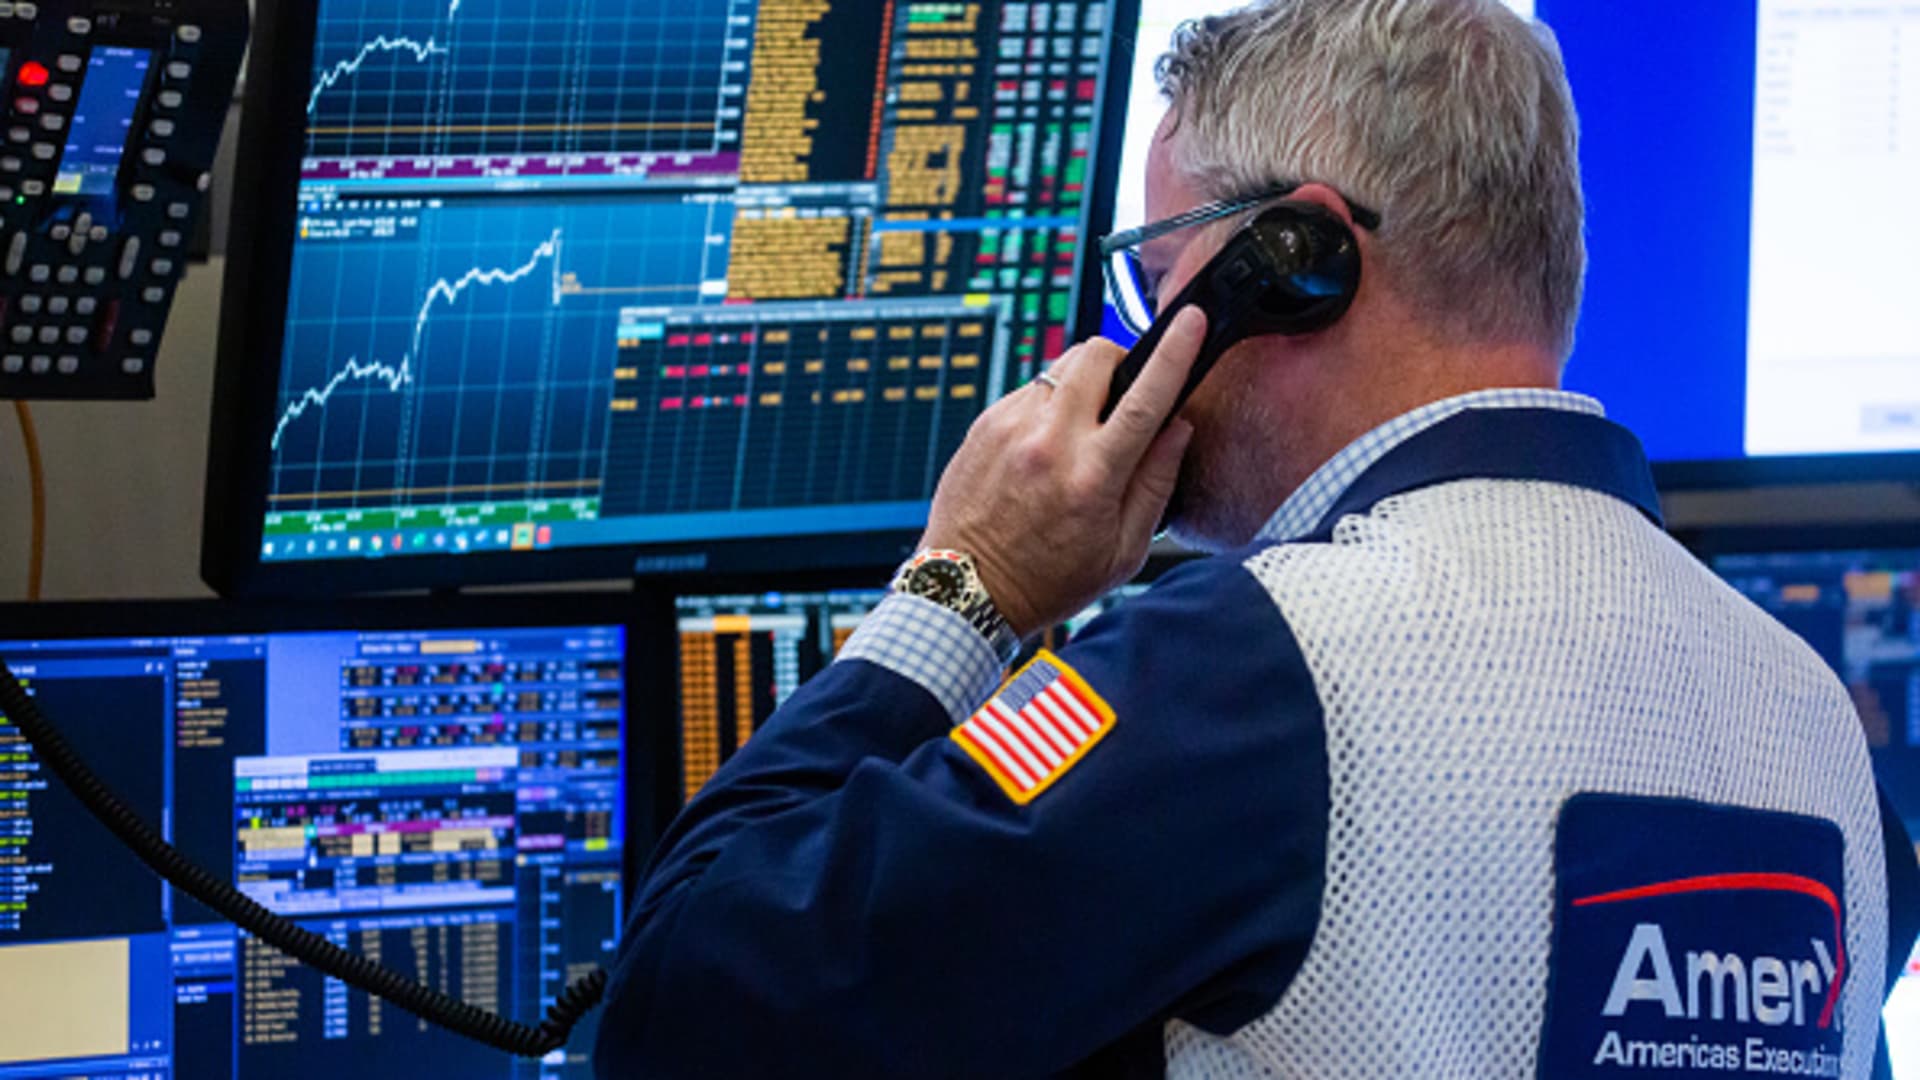 A trader works on the floor of the New York Stock Exchange (NYSE) in New York, on Tuesday, May 31, 2022.